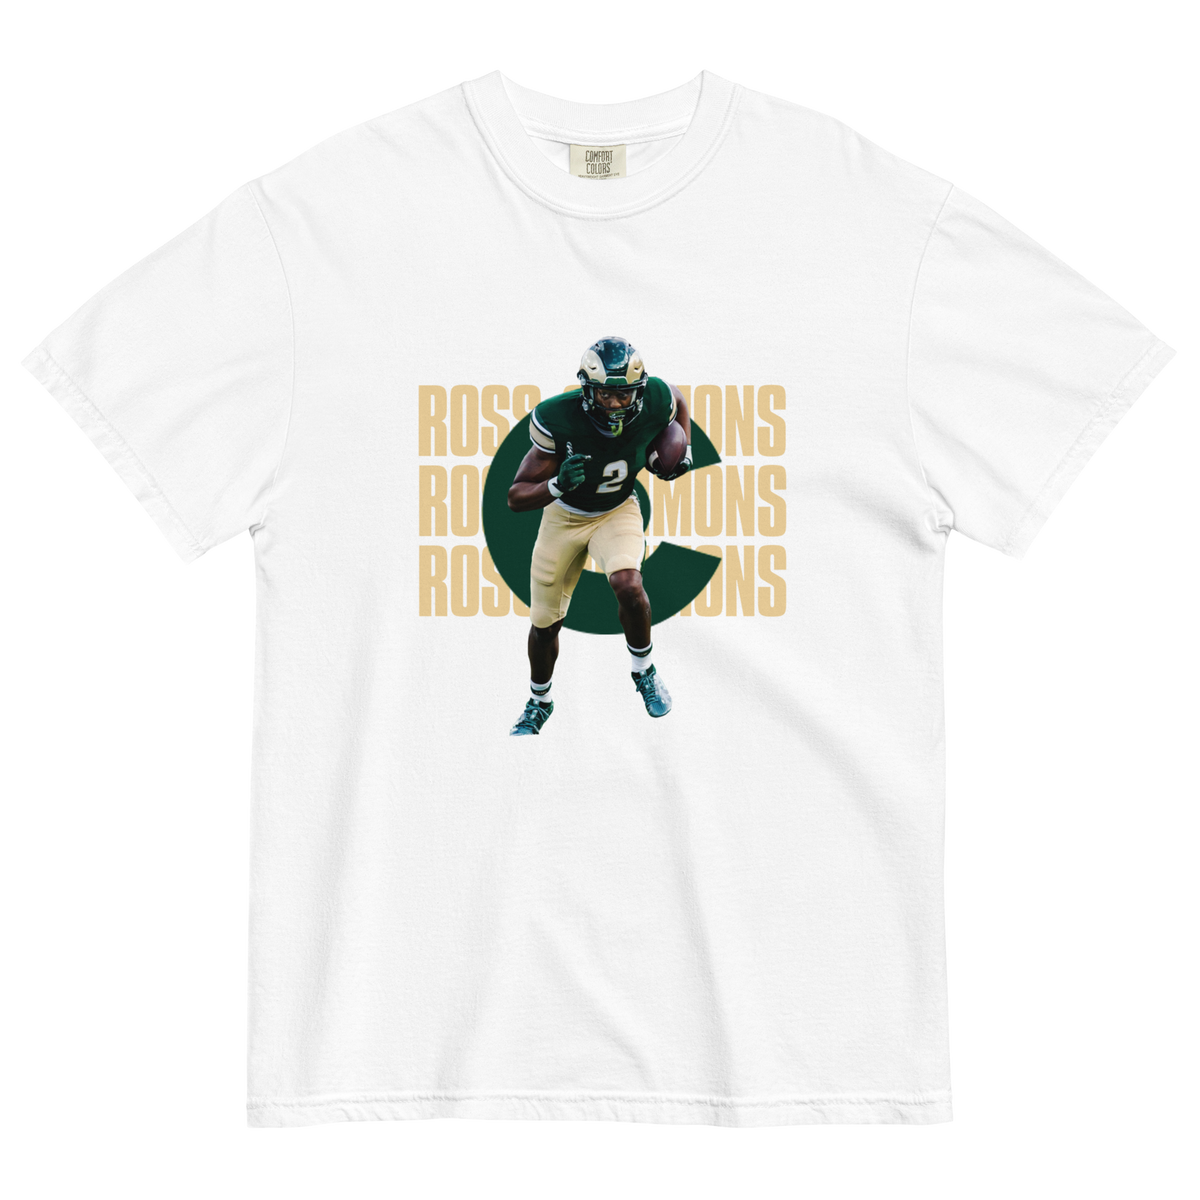 GRAPHIC TEE- JUSTUS ROSS-SIMMONS